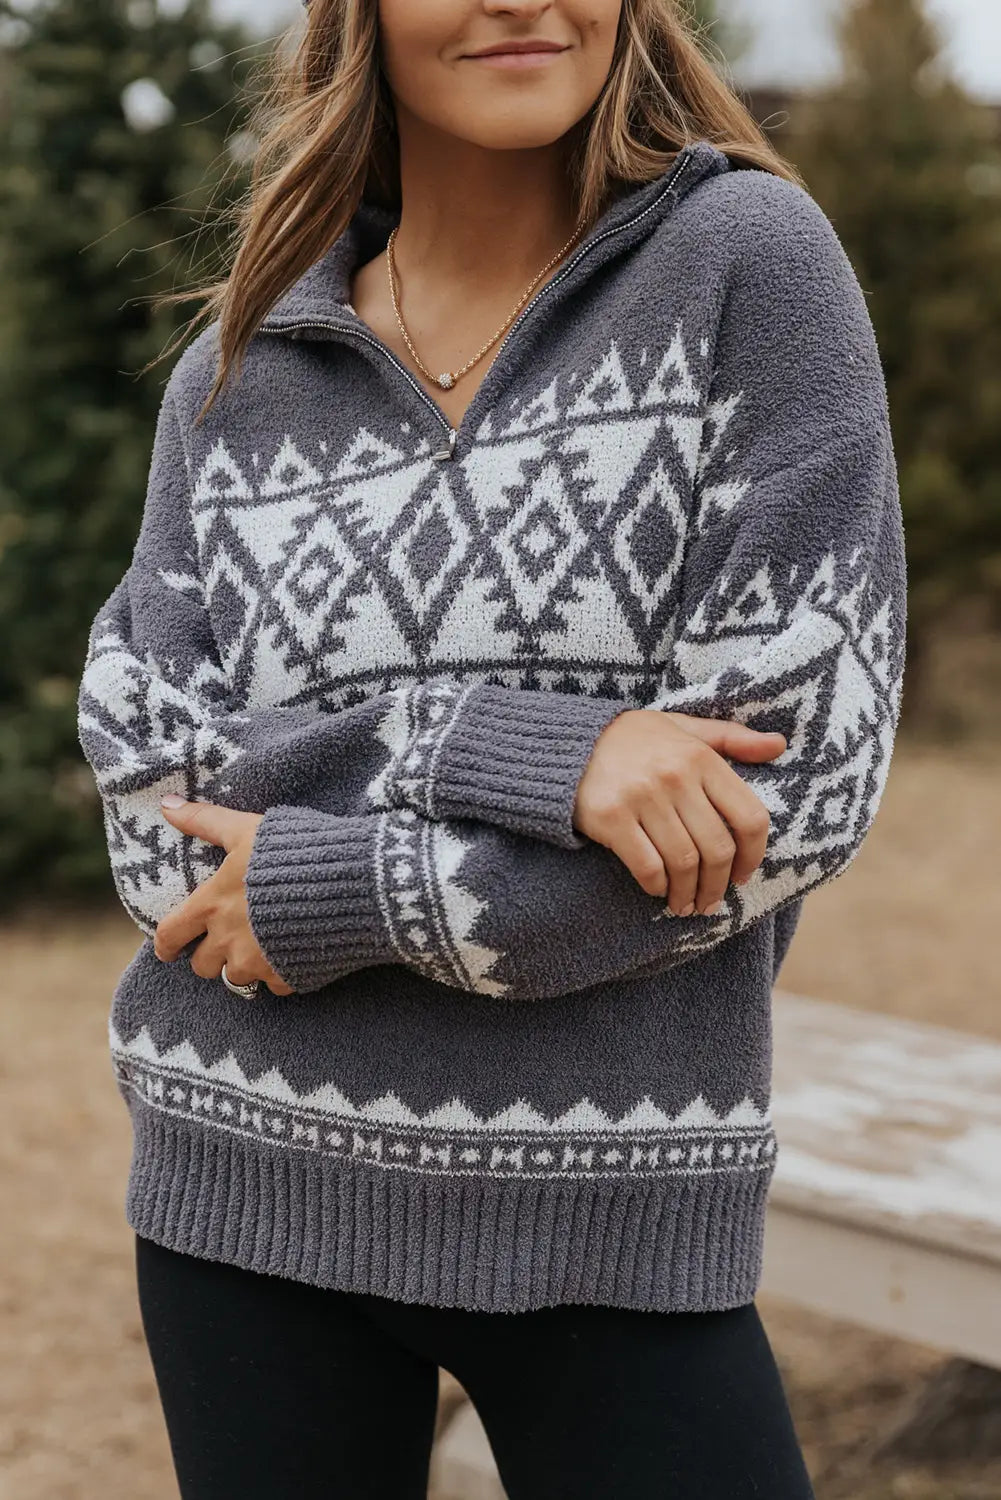 Gray western geometric printed quarter zip pullover sweater - sweaters & cardigans